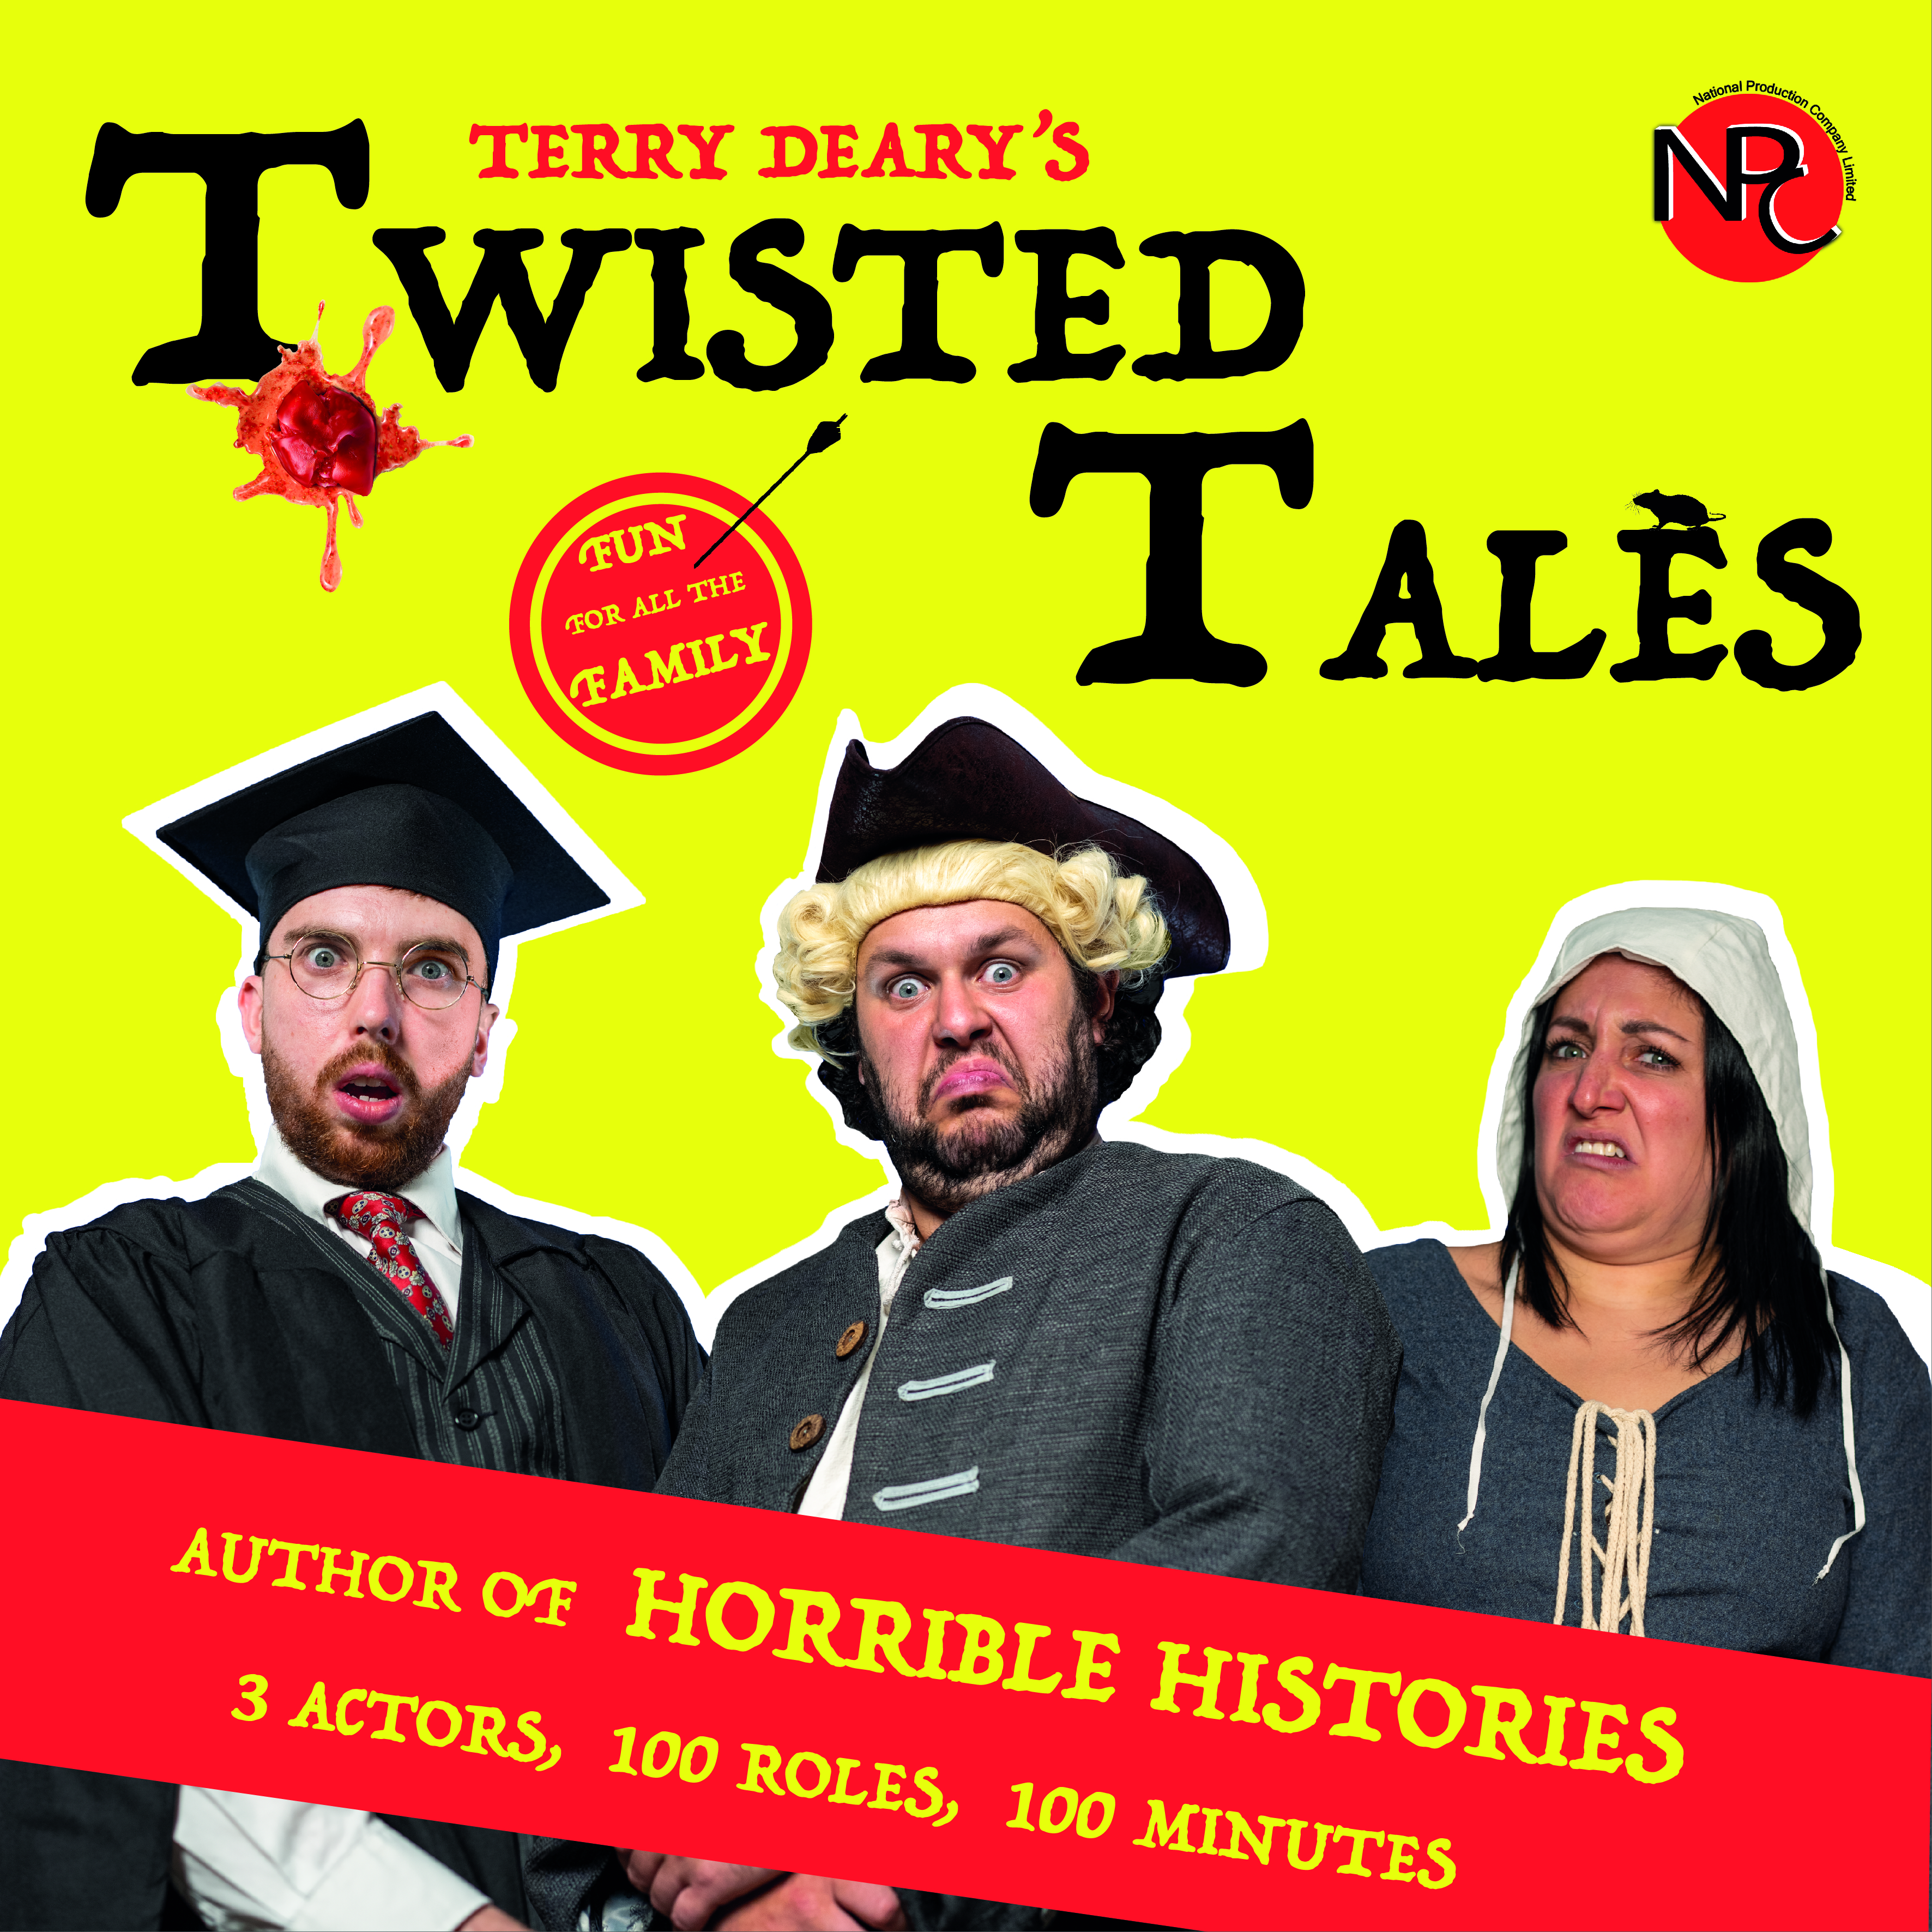 The Live theatre show for all the family Terry Deary's Twisted Tales from the author of Horrible Histories 